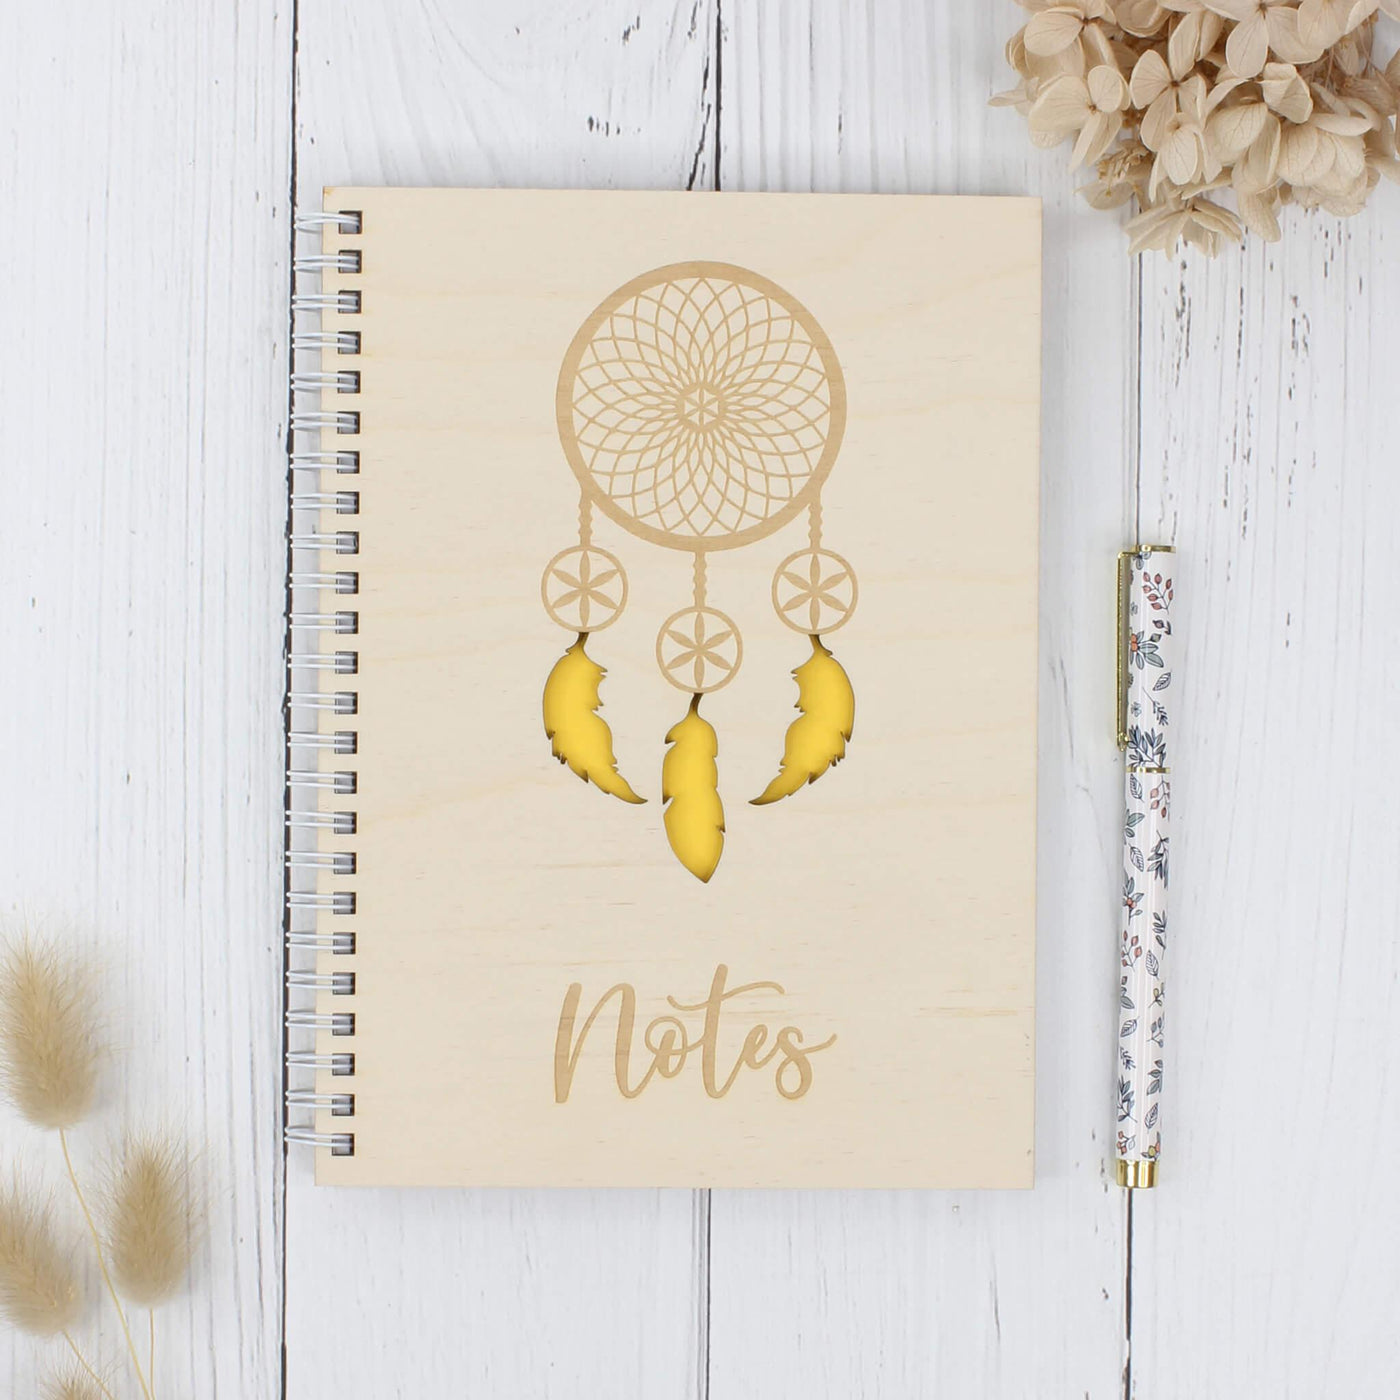 Personalised wooden notebook - dreamcatcher yellow